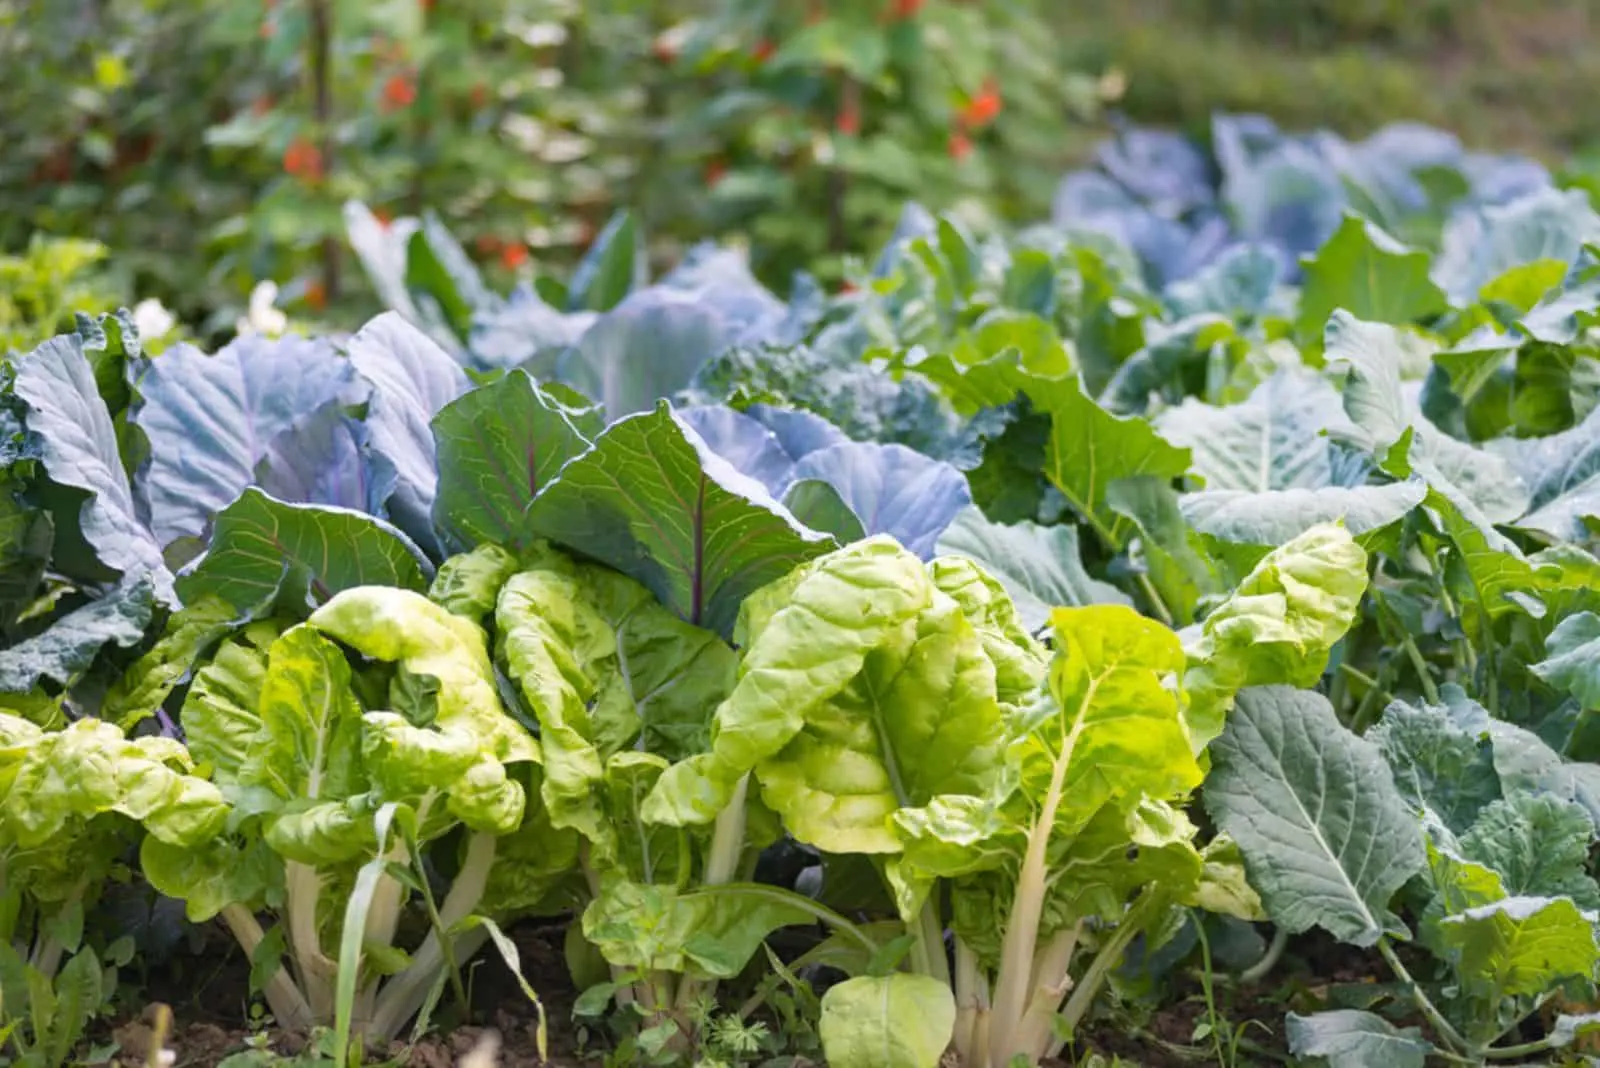 Leaves of various cabbage (Brassicas) plants in homemade garden plot